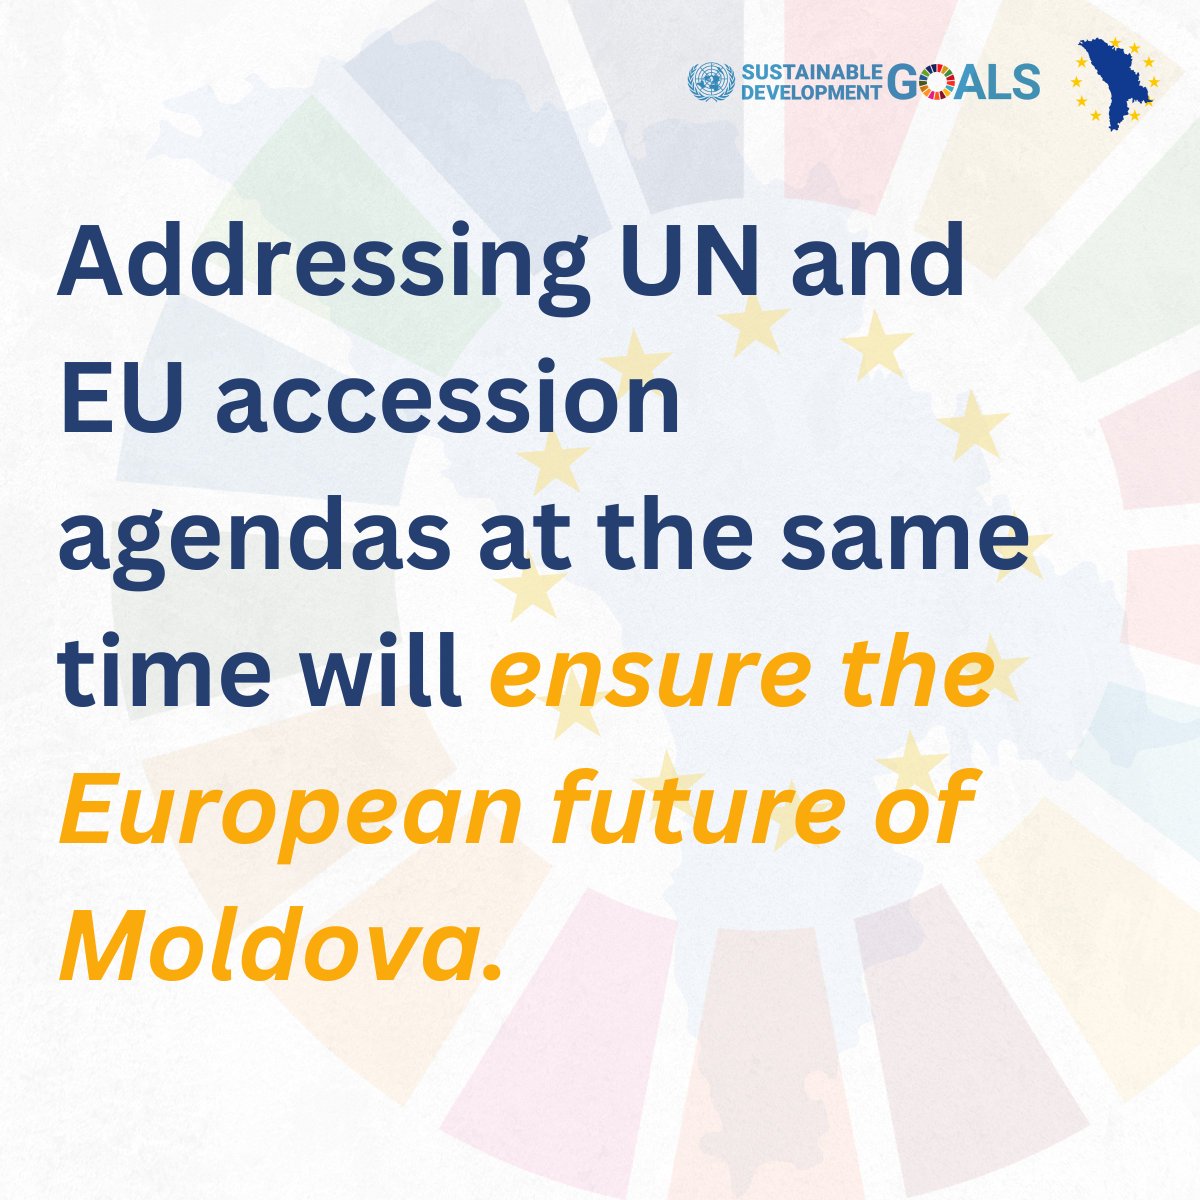 There is a strong complementarity & synergy between the EU accession agenda, the 2030 Agenda & SDGs as mutually reinforcing processes. Addressing both agendas at the same time will ensure strategic goals are achieved easier and more effectively. 
Report 👉 bit.ly/3ygL769